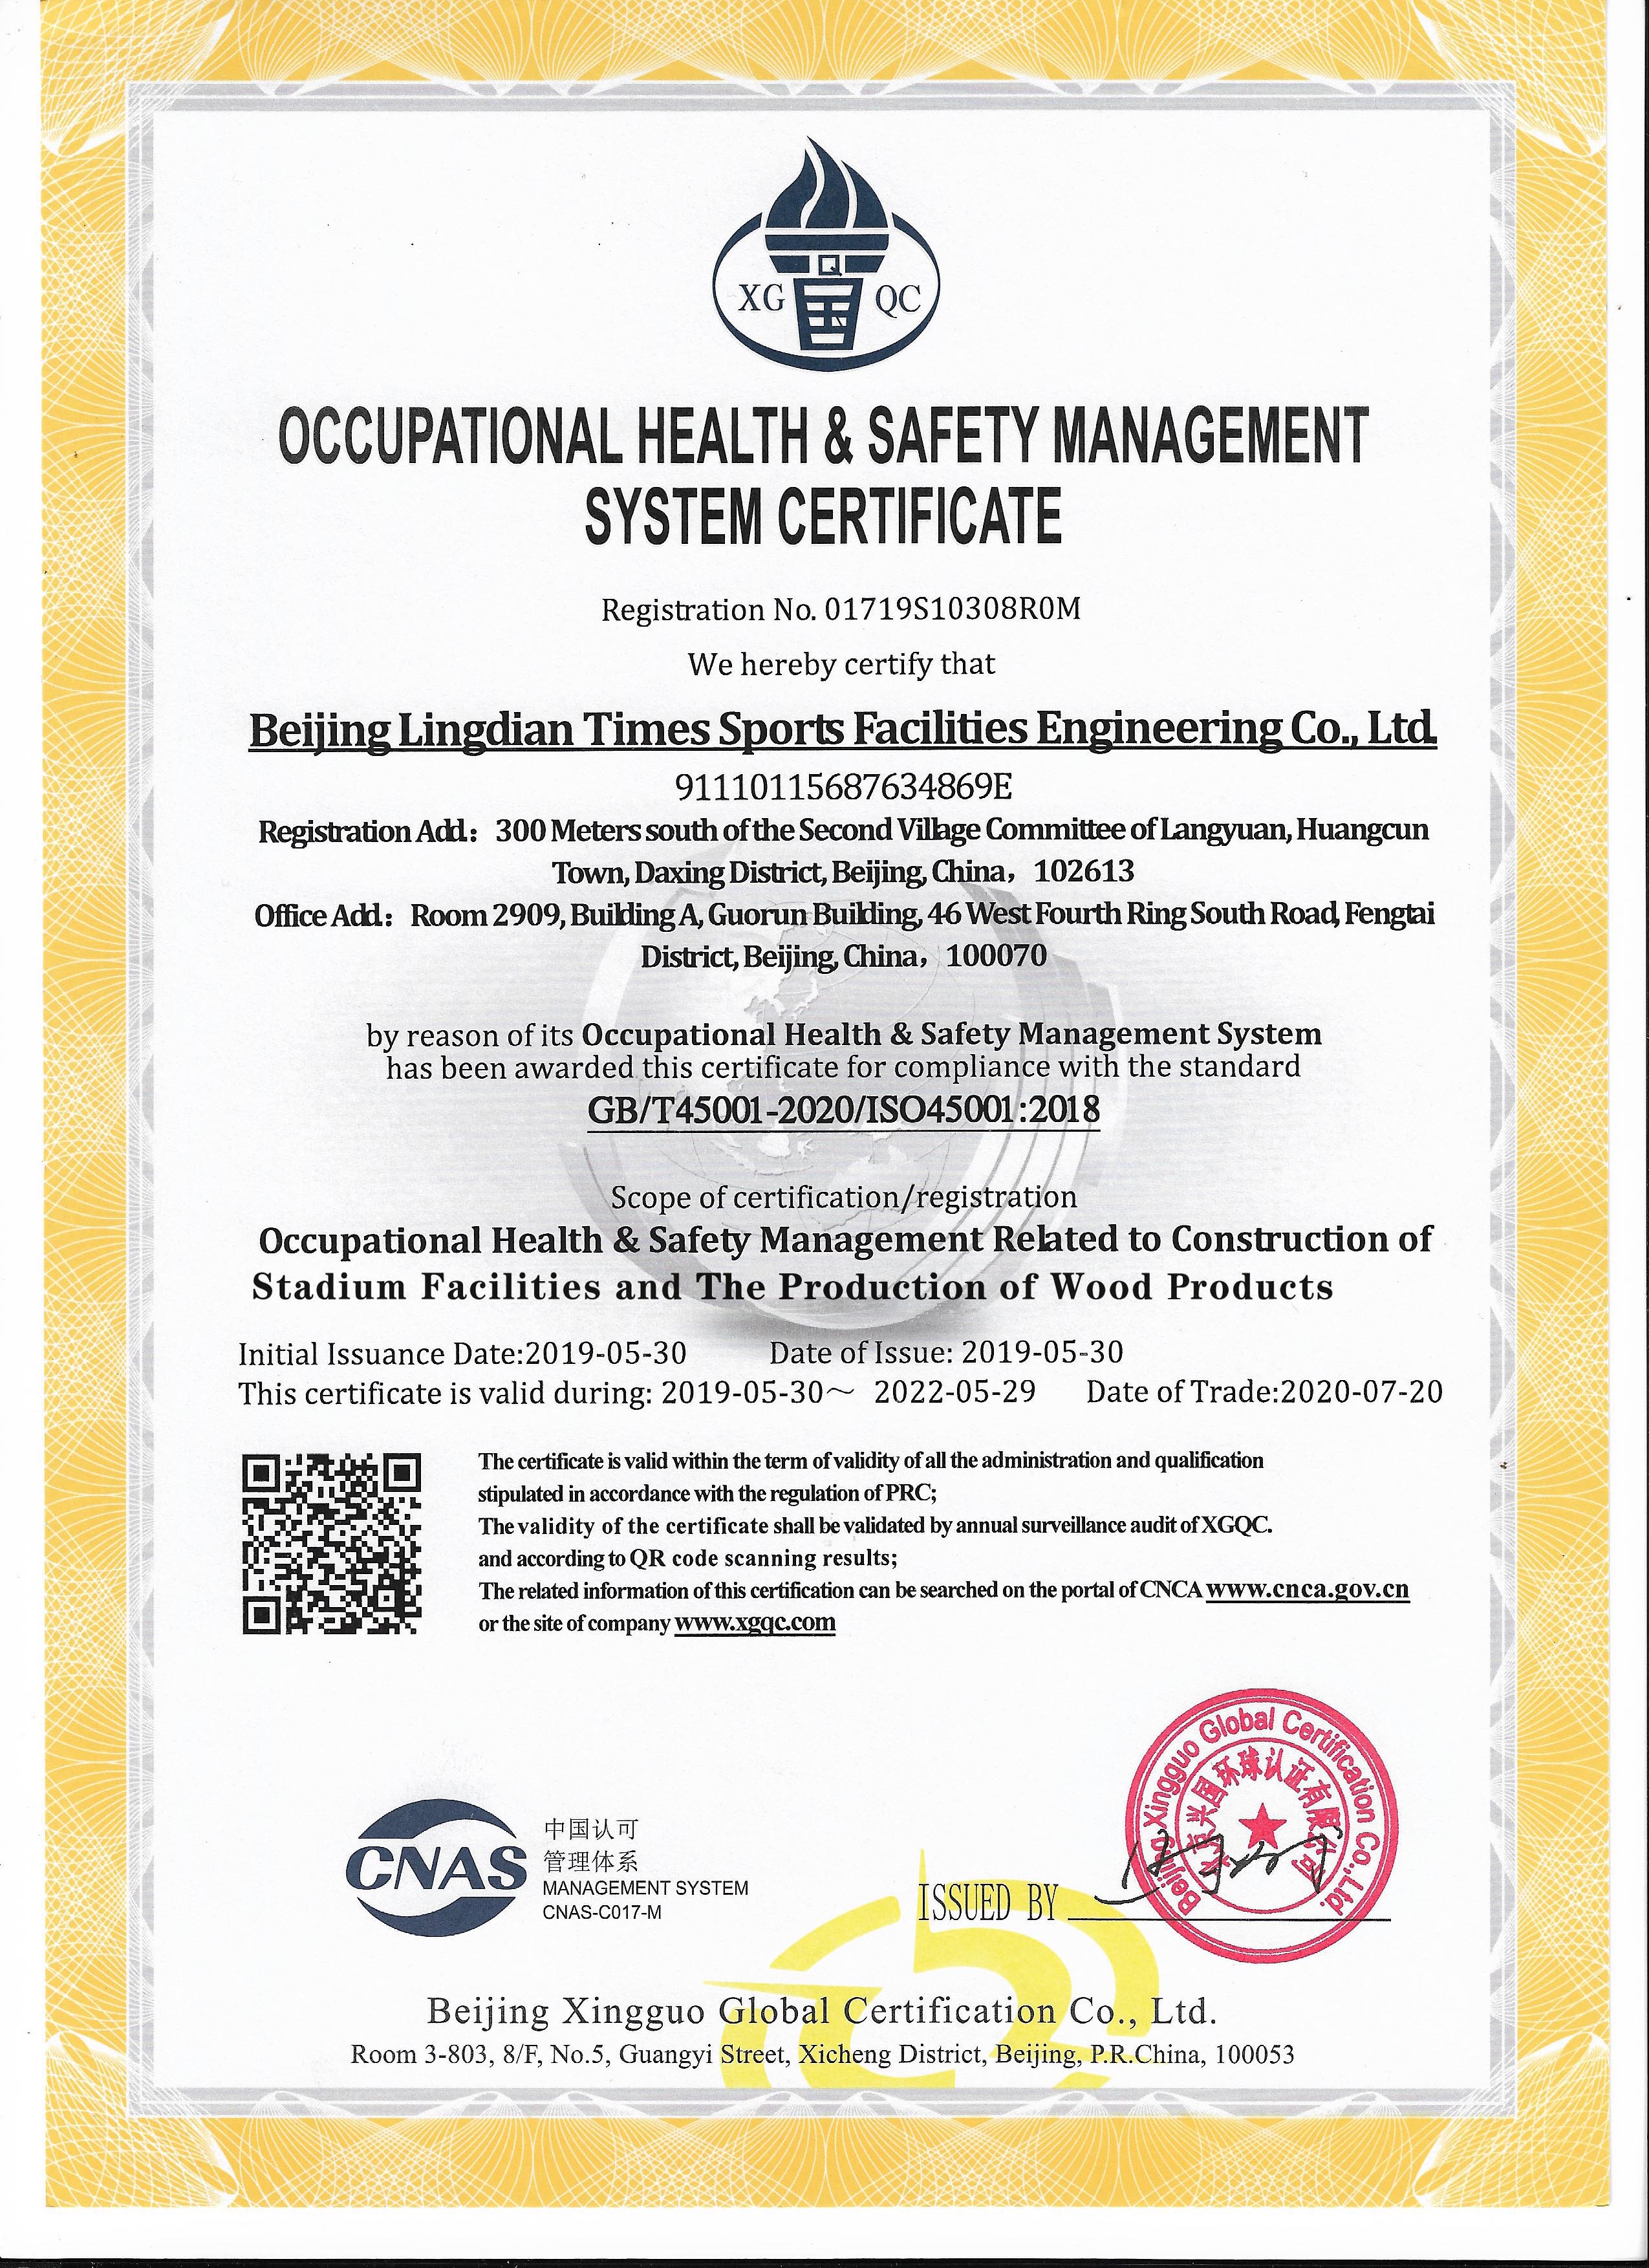 Occupational Health&Safety Management System Certificate